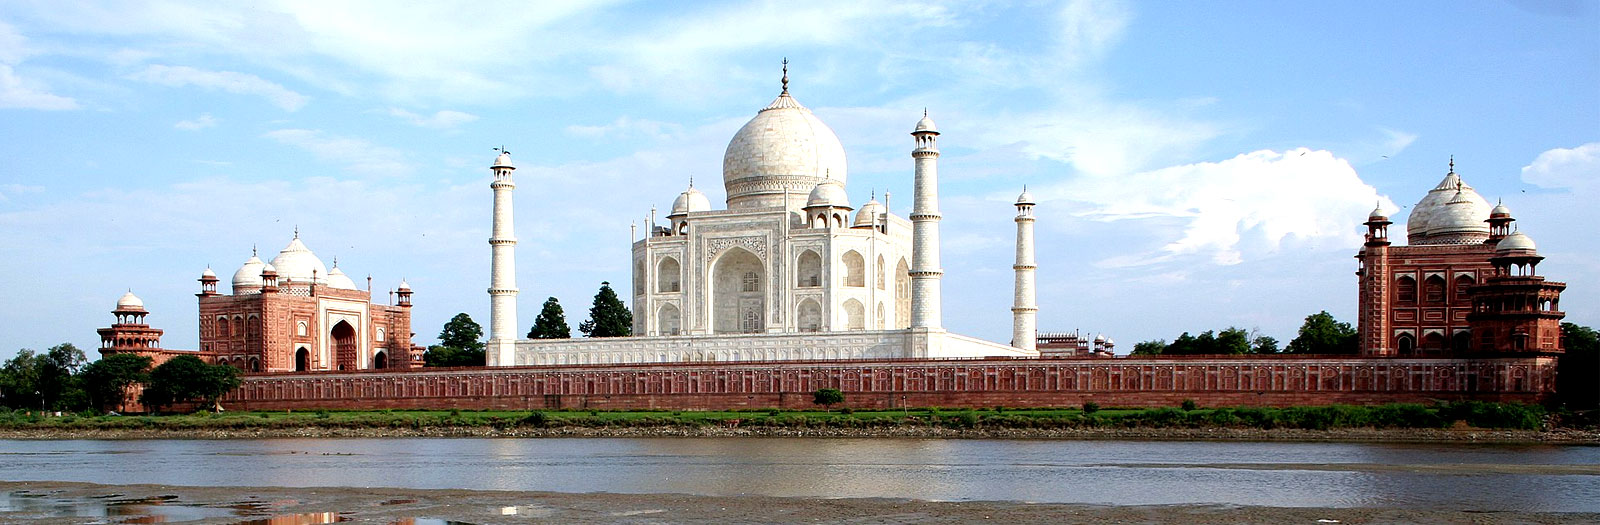 visit taj mahal in agra, one of the prime attractions. Seventh Wonder in the world. Book your Agra Tour Today by Namaste Holiday.